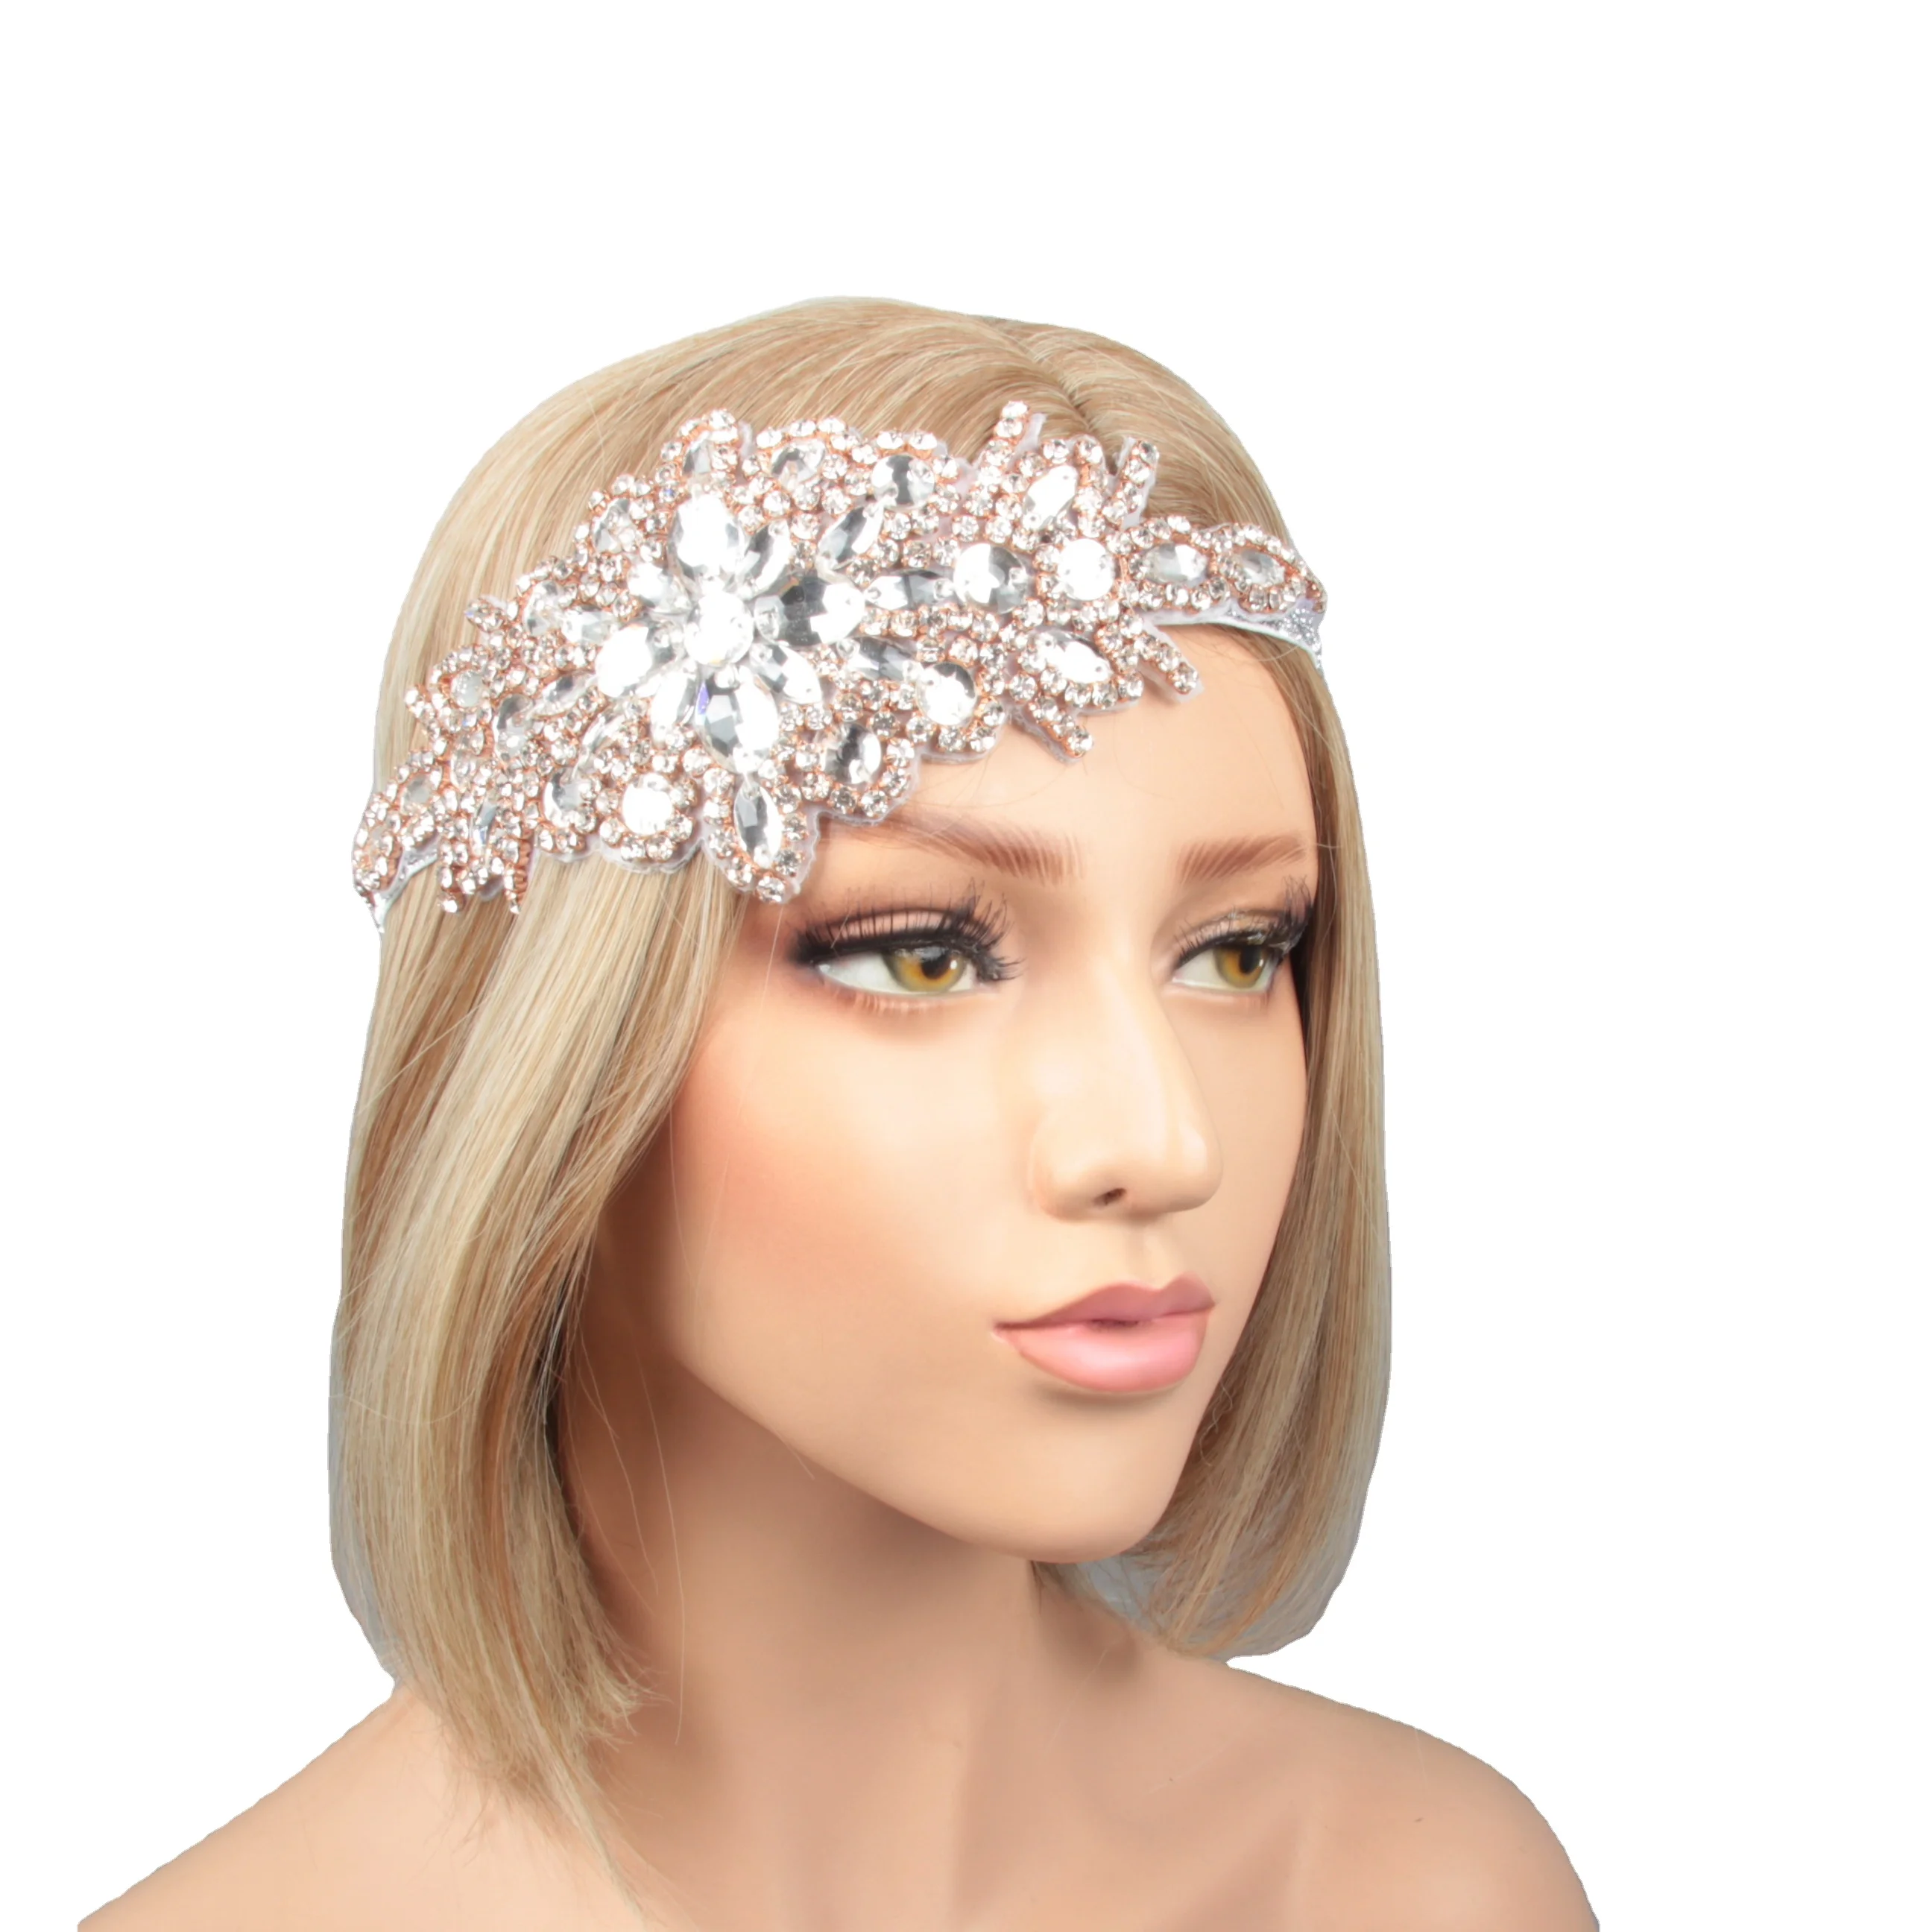 

Factory Sale Luxury Gorgeous Crystal Rhinestone Wedding Dress Headbands Personalize Priceless Bridal Hair Garment Accessories, Clear crystal applique